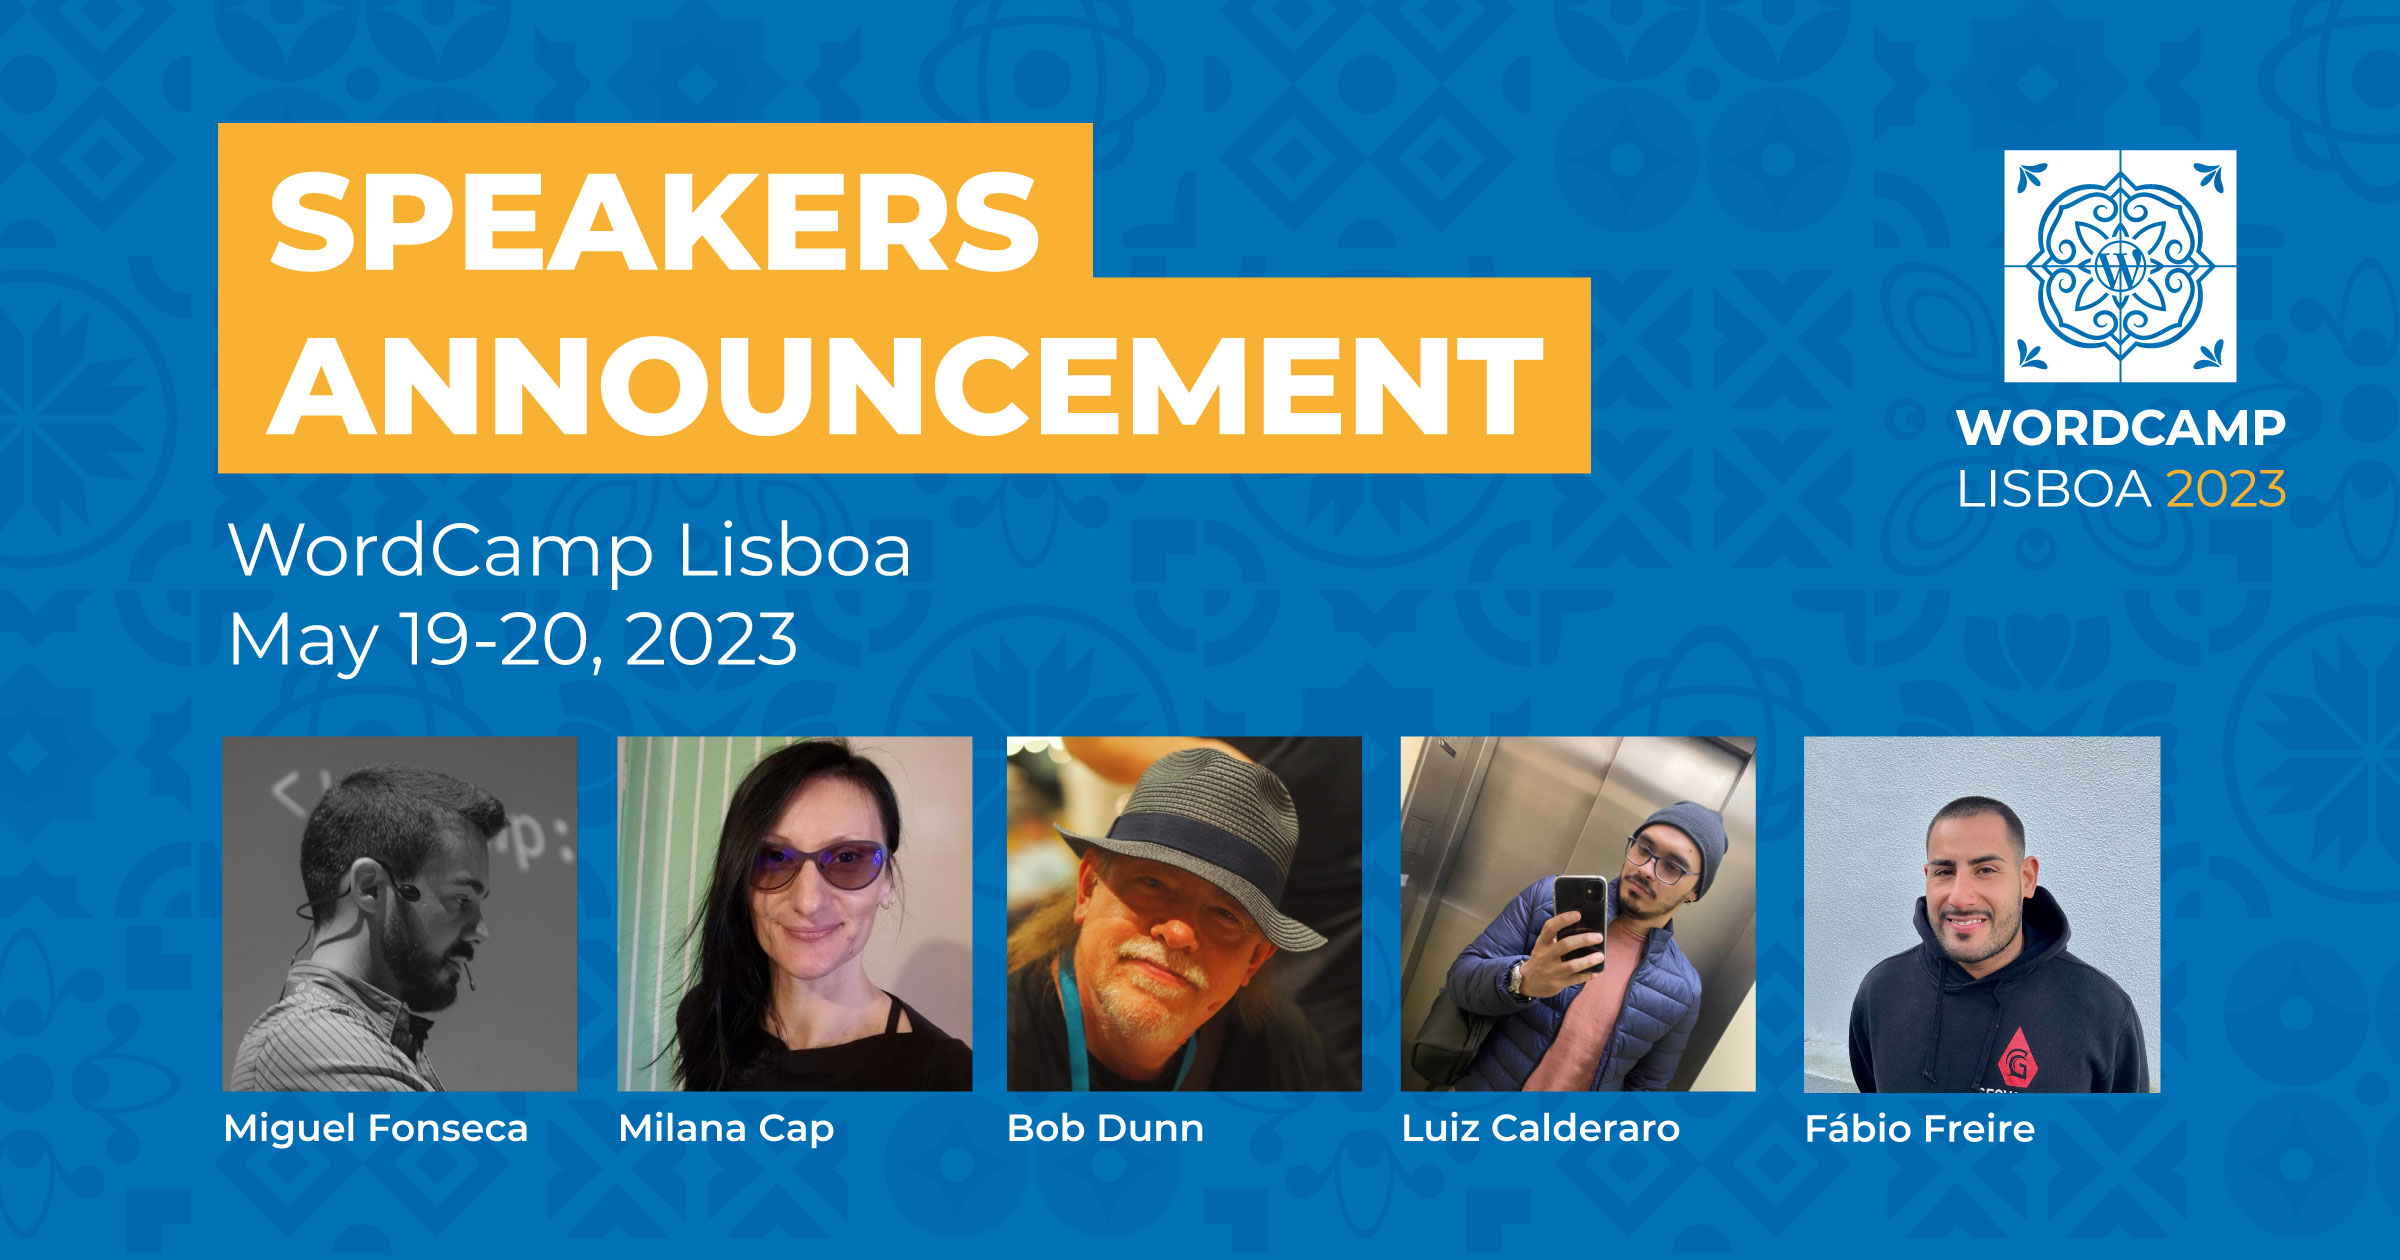 First batch of speakers announced